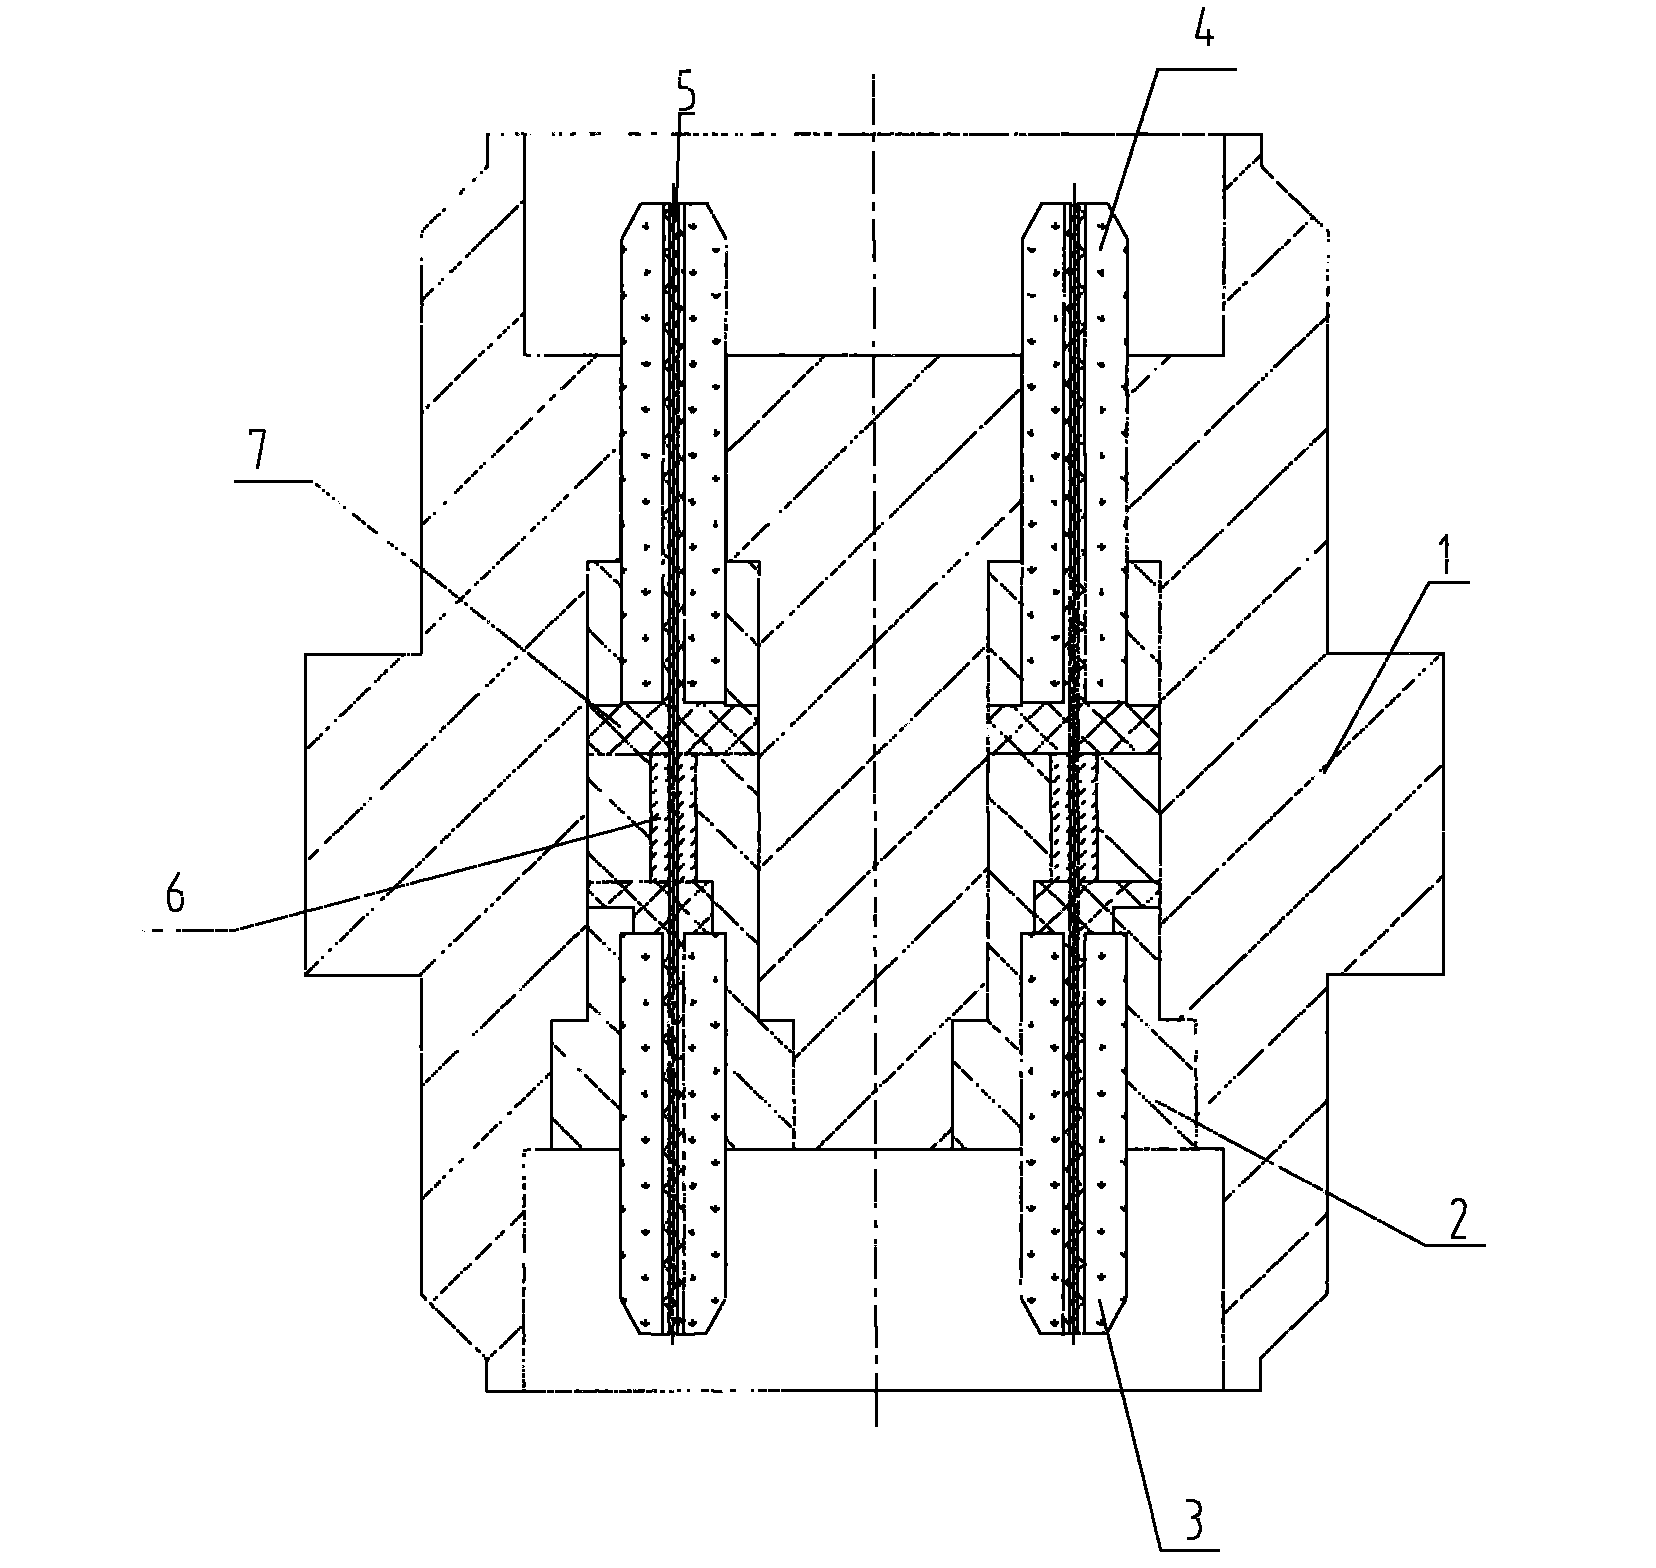 Optical fiber cabin-penetrating sealing connection socket device used for sealing cabin